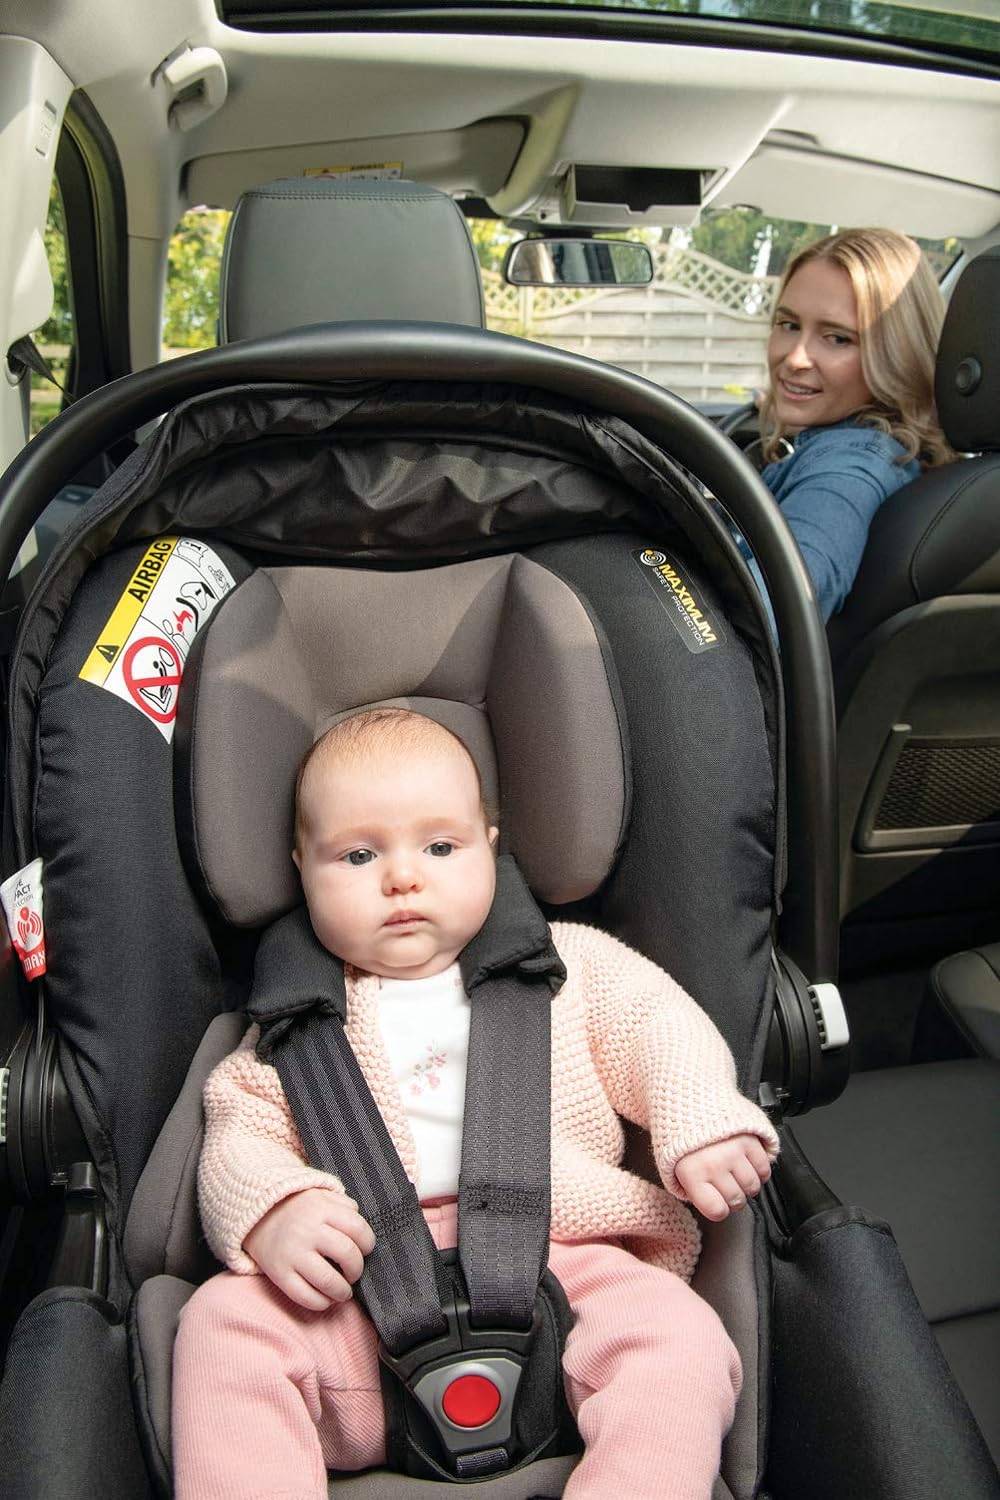 GRACO SnugEssentials i-Size Baby Car Seat from Birth to 75 cm, Lightweight Baby Car Seat, Can also be Used with Isofix Base, Side Impact Protection, Newborn Insert, Sun Canopy, Midnight Black